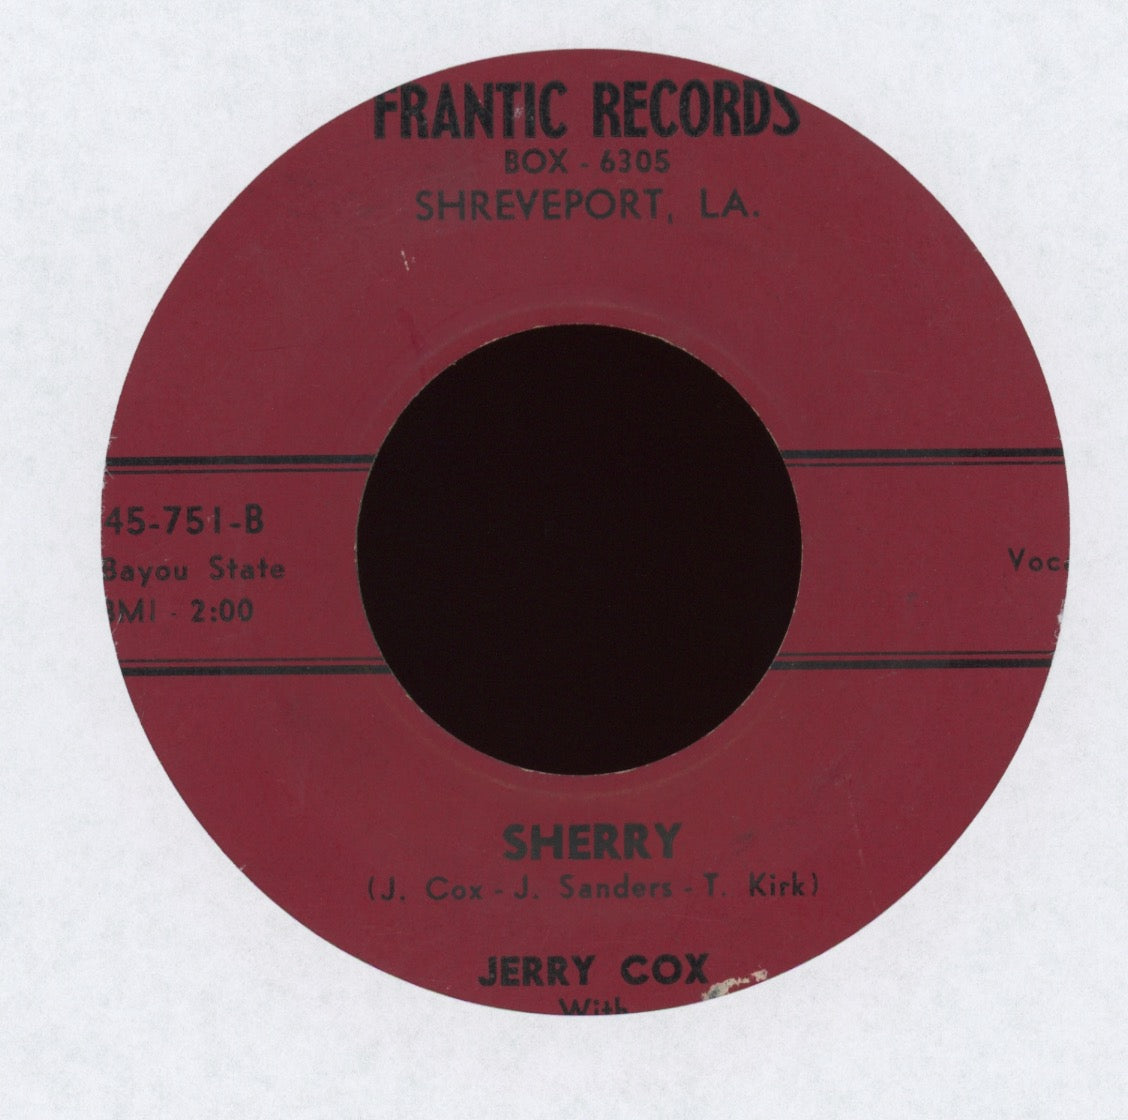 Jerry Cox - Sherry on Frantic